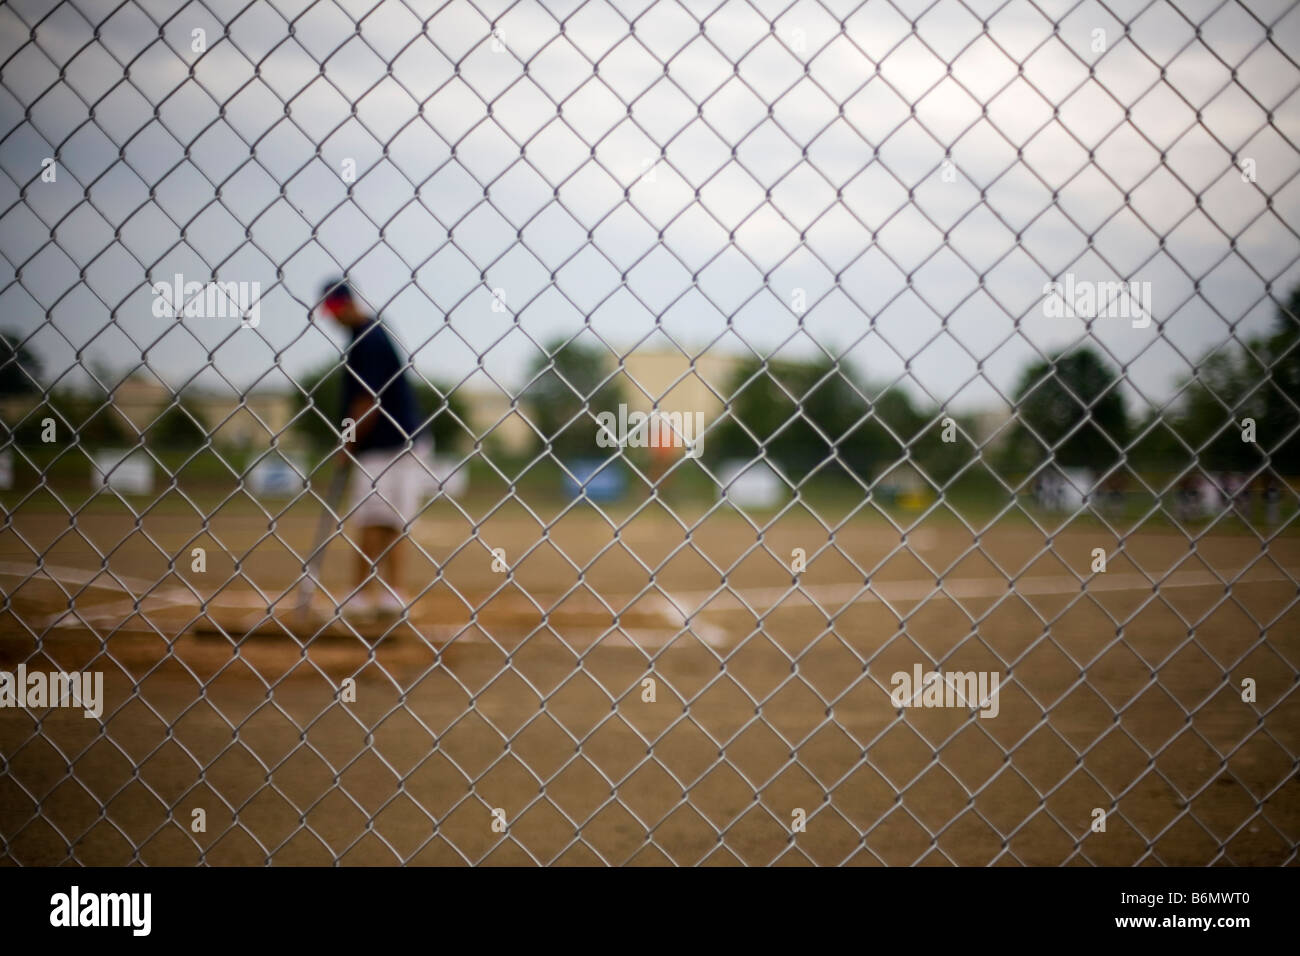 A baseball player gets ready to hit a ball Stock Photo